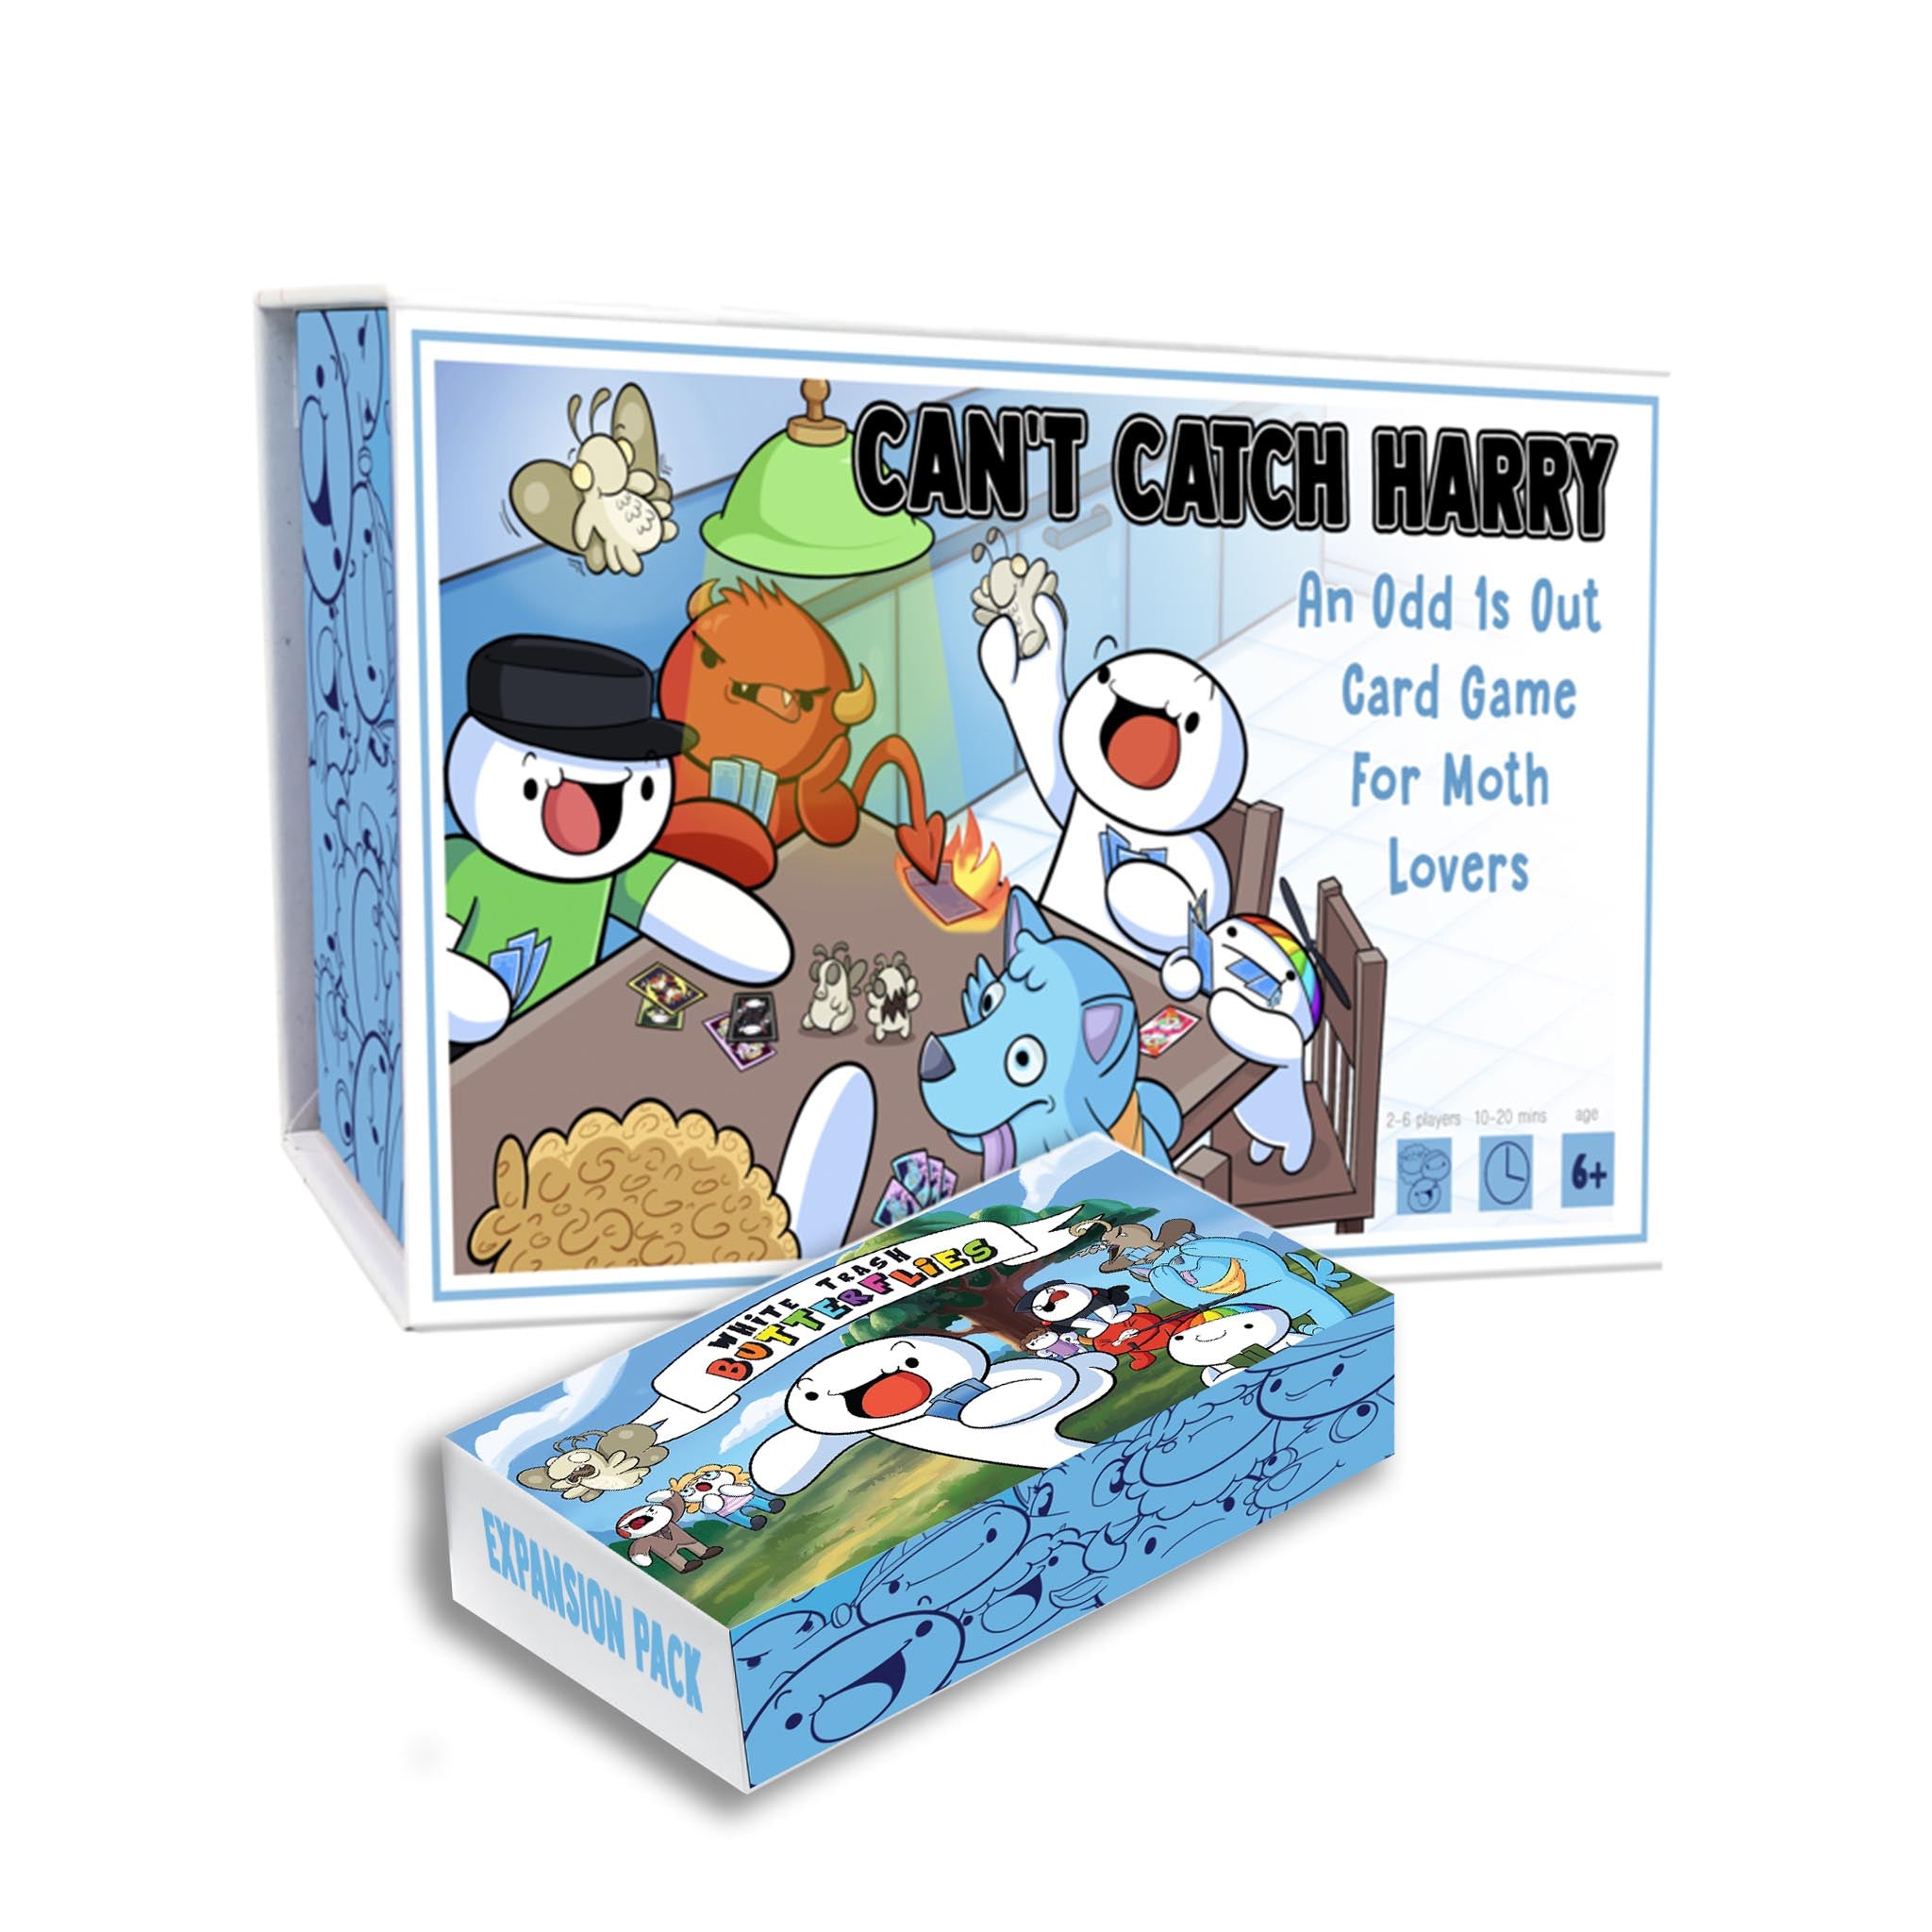 Can't Catch Harry Bundle | Official enkayinstruments Store